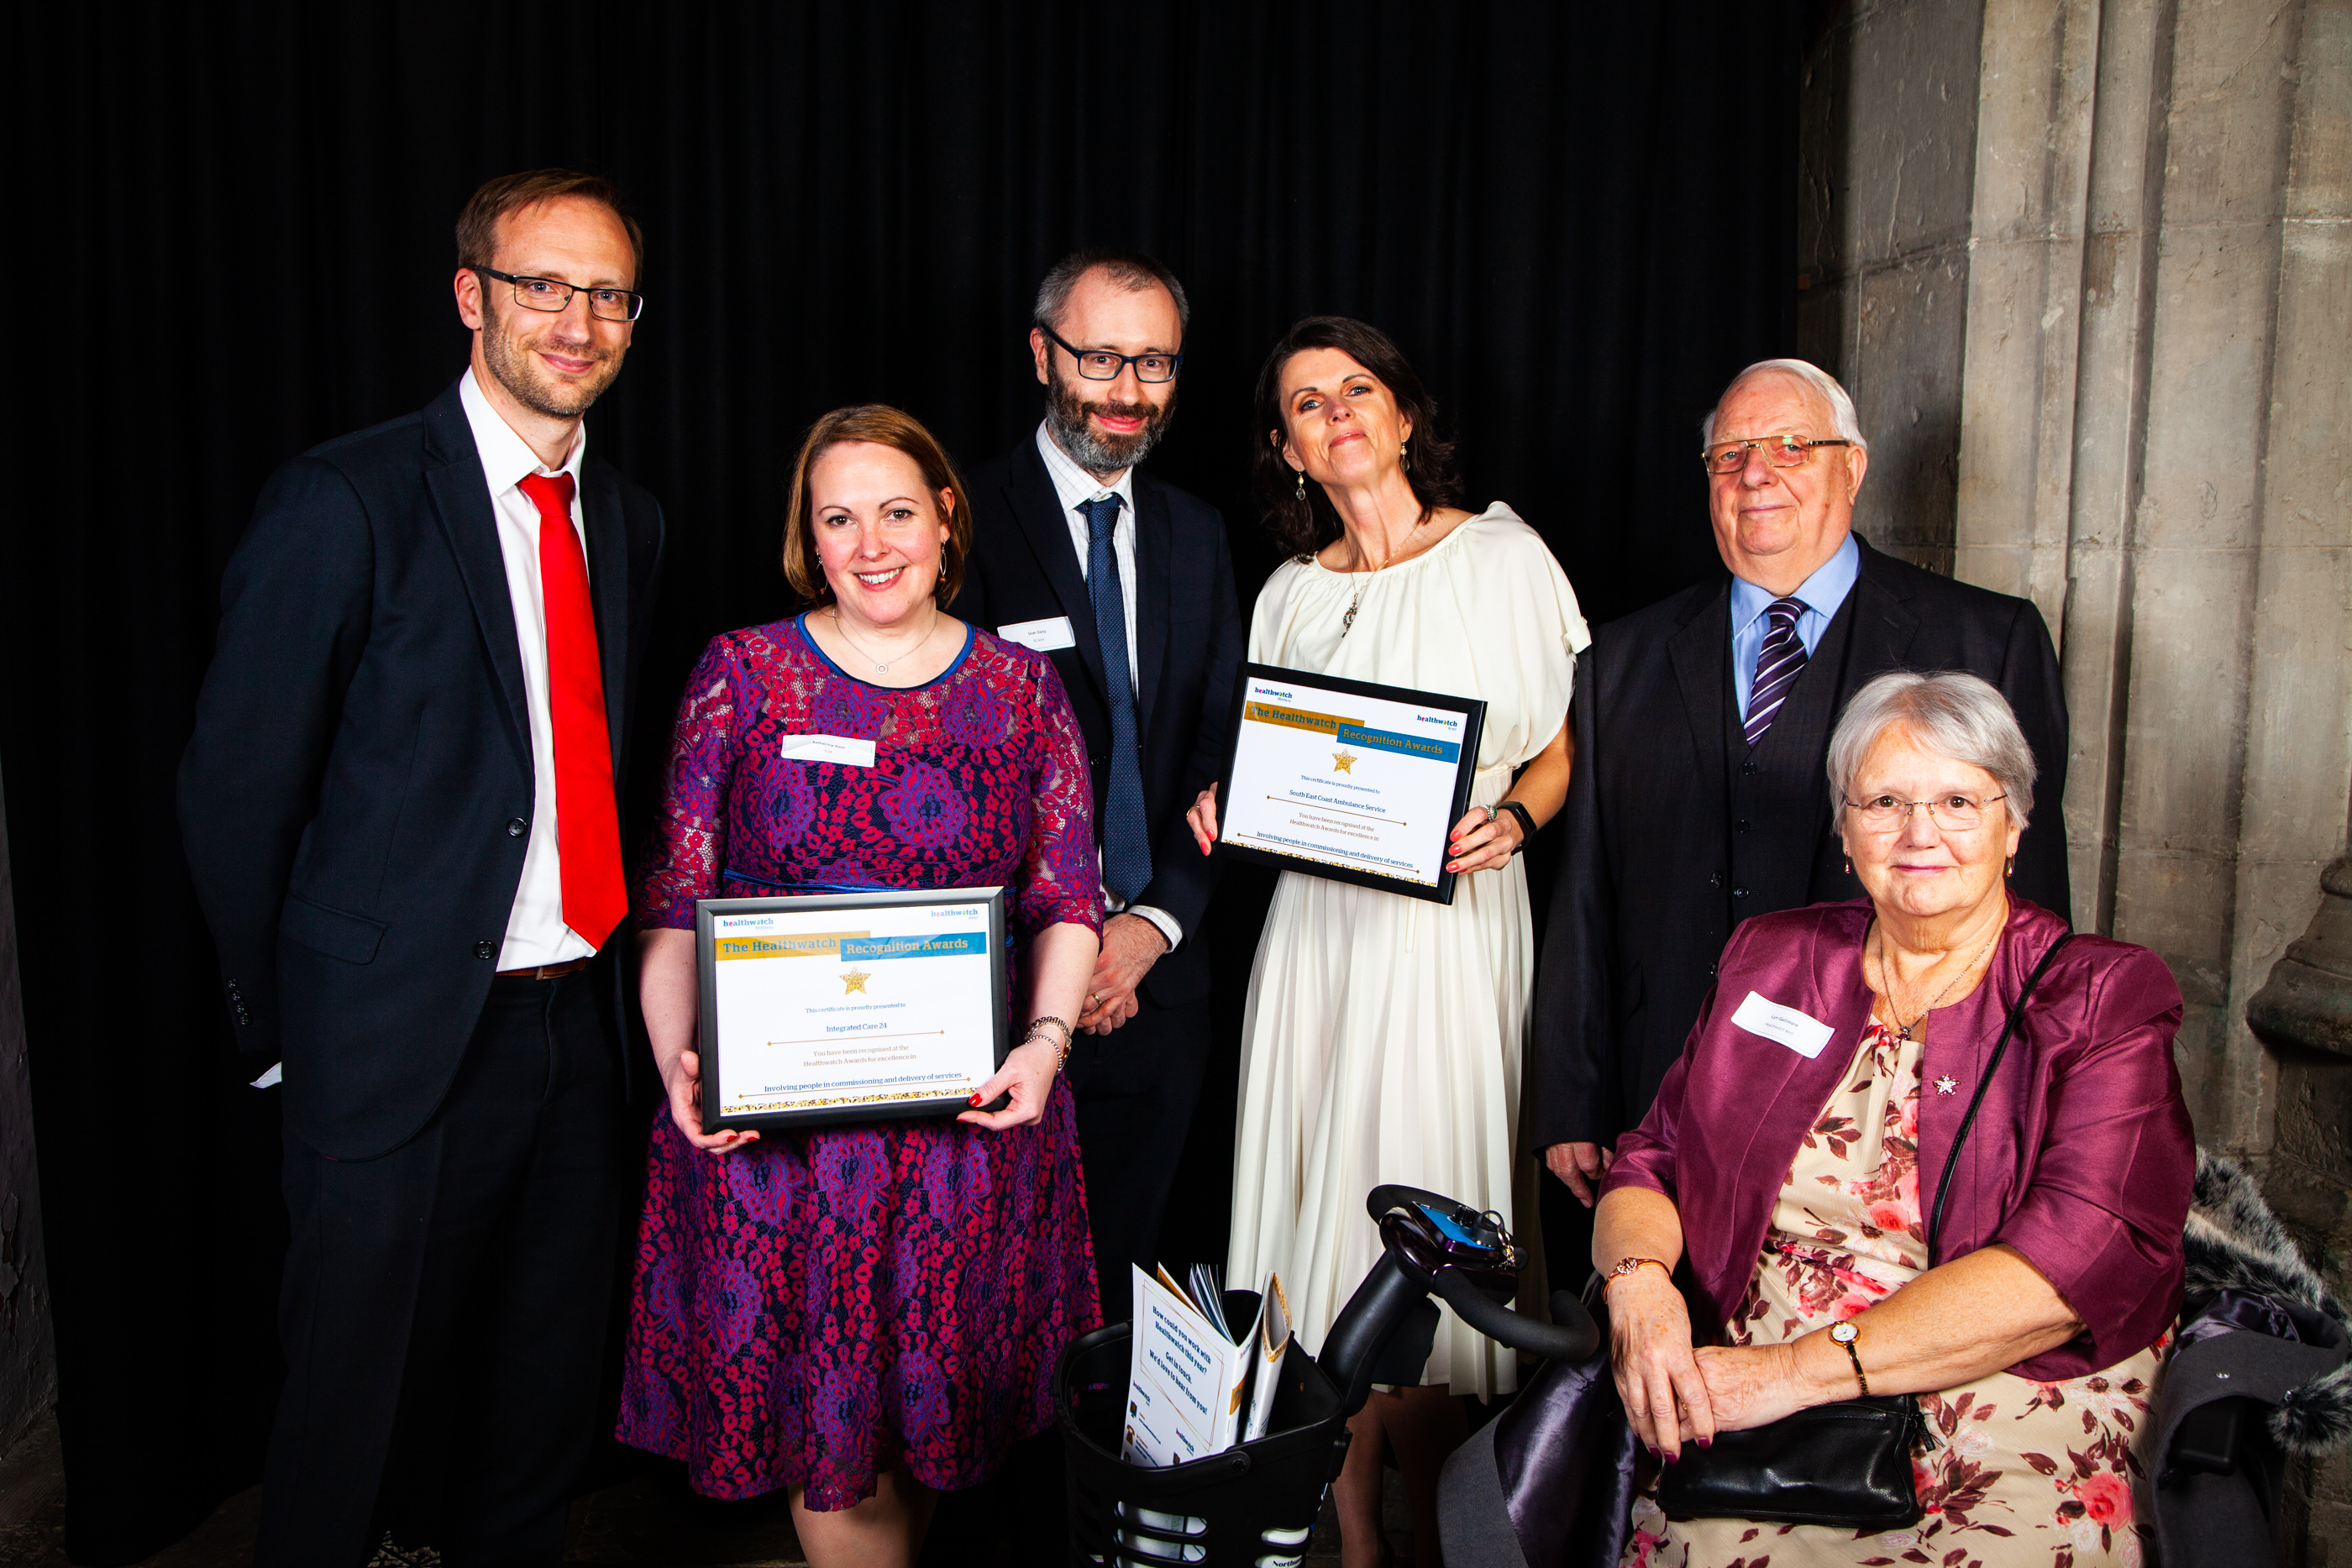 Representatives from IC24, SECAmb and Healthwatch at the awards. Pic: Healthwatch